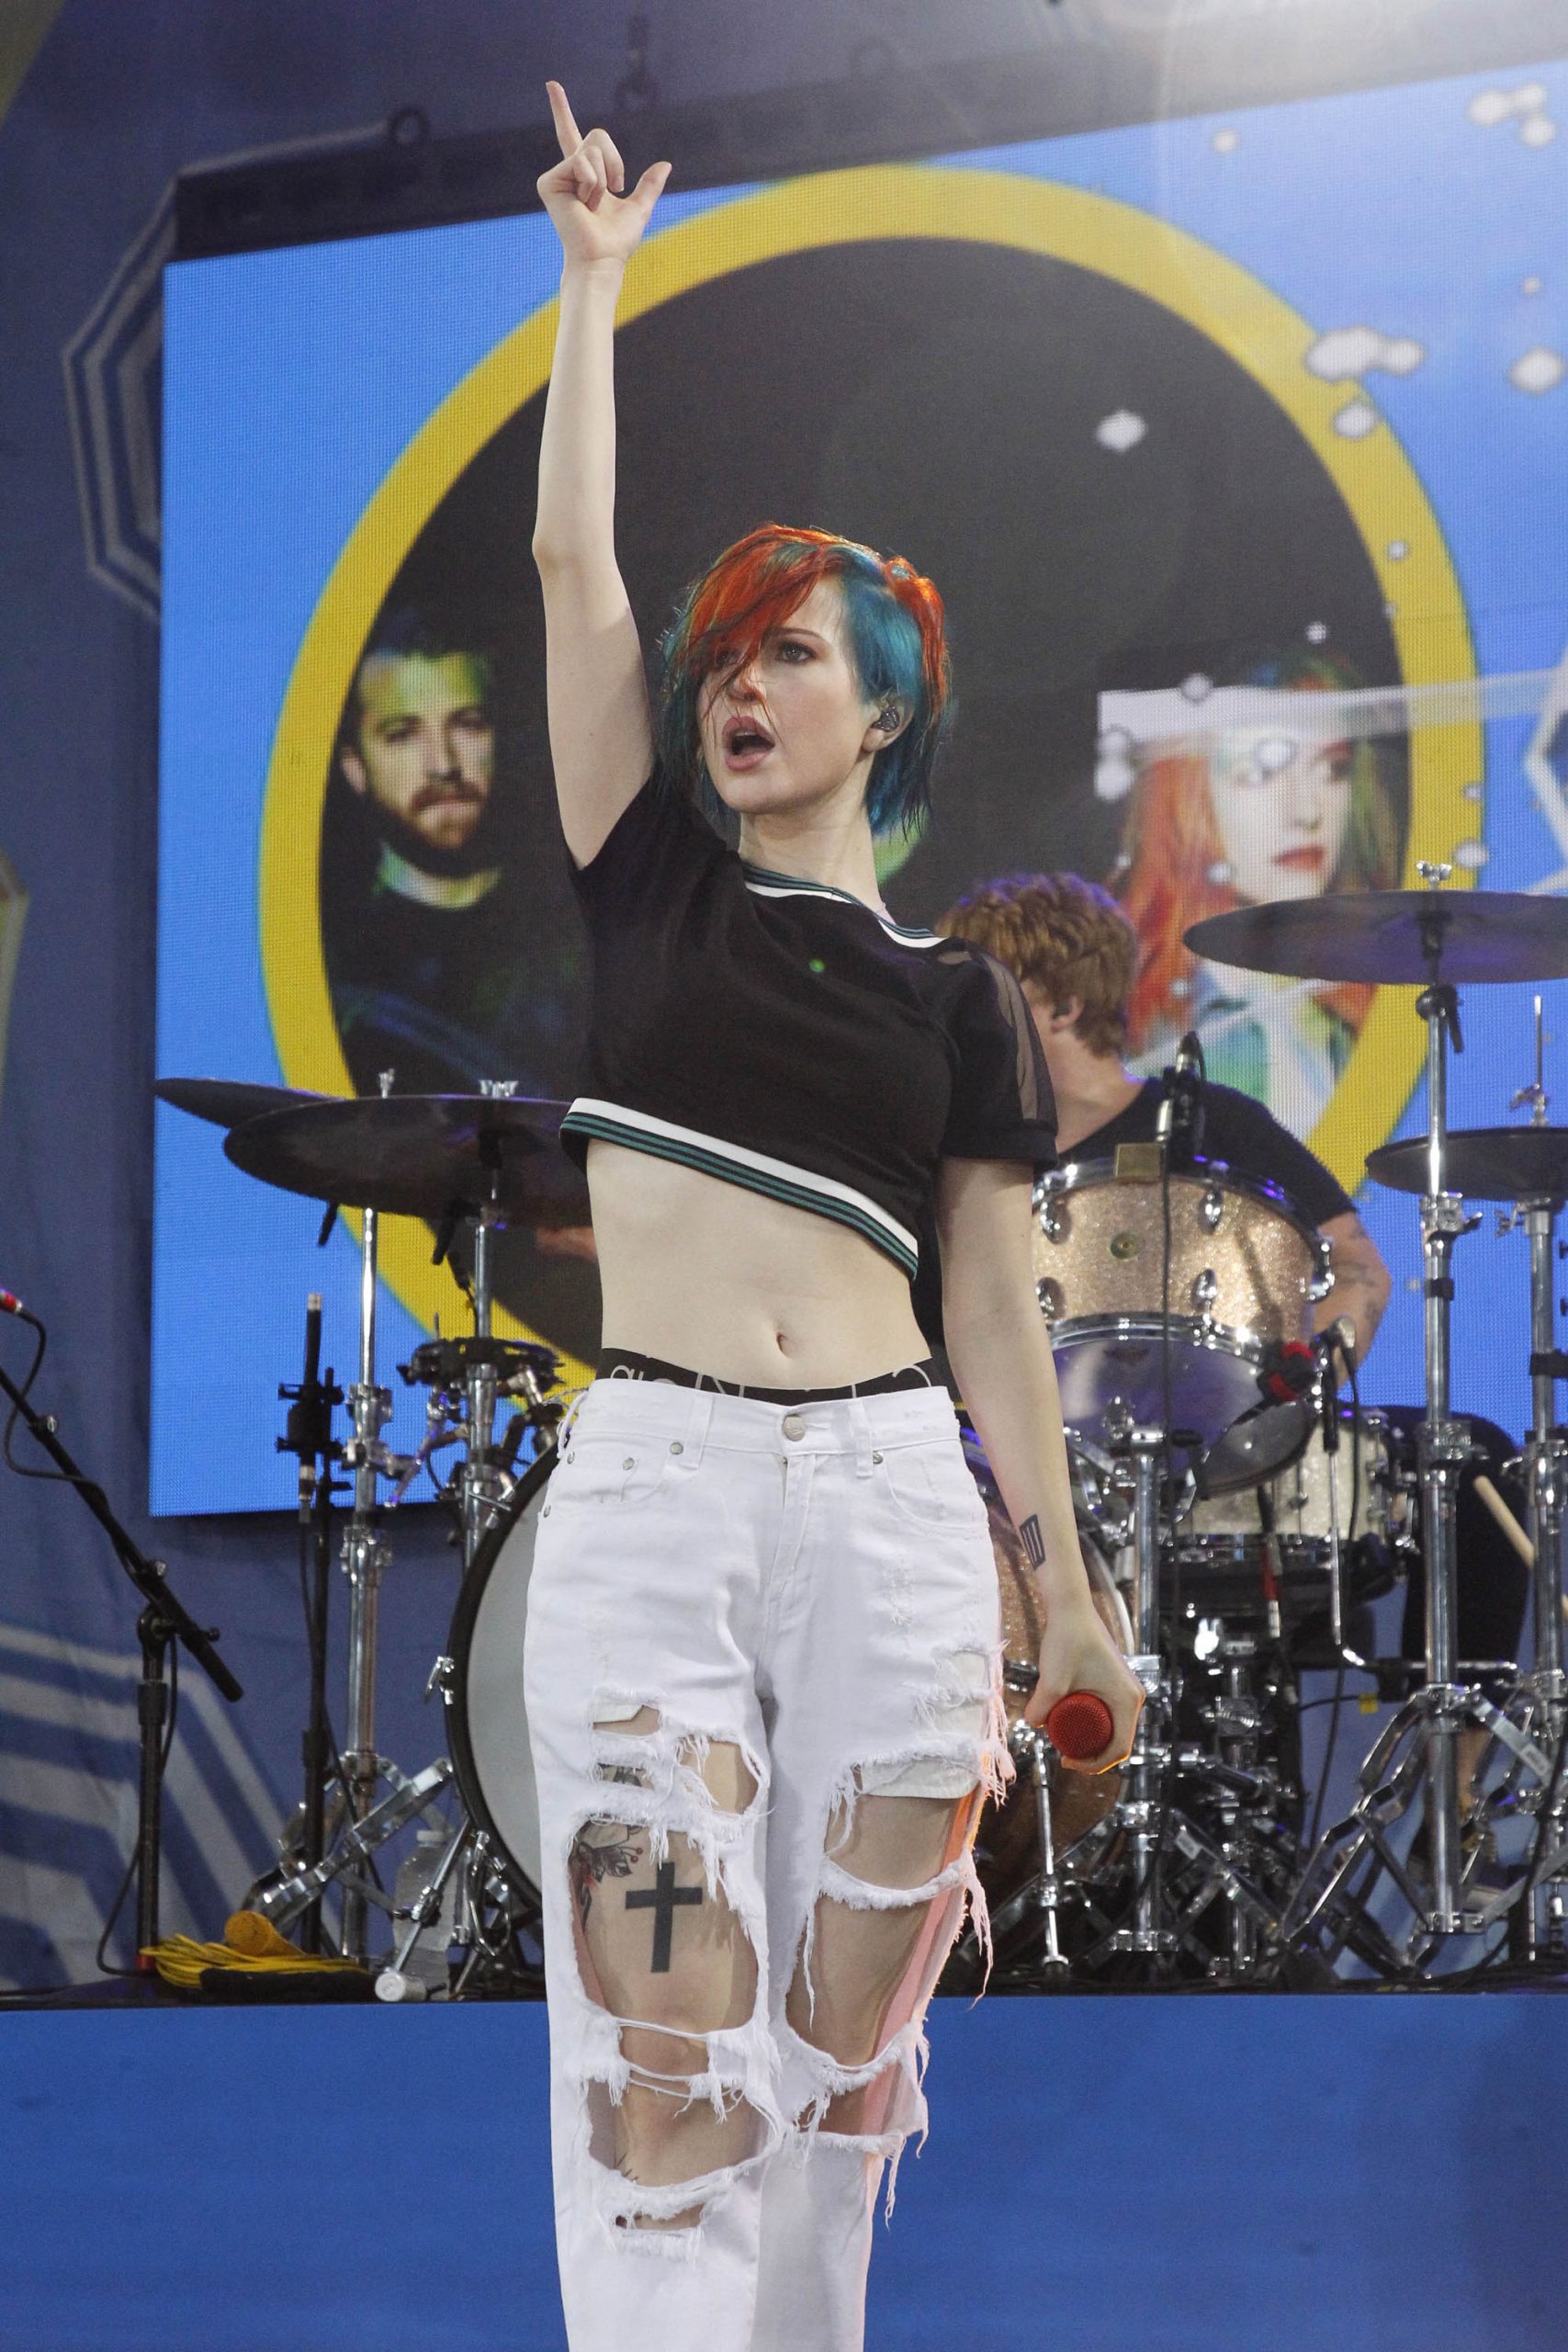 Sexy Songstress Hayley Williams Displaying Her Tight Body on Stage